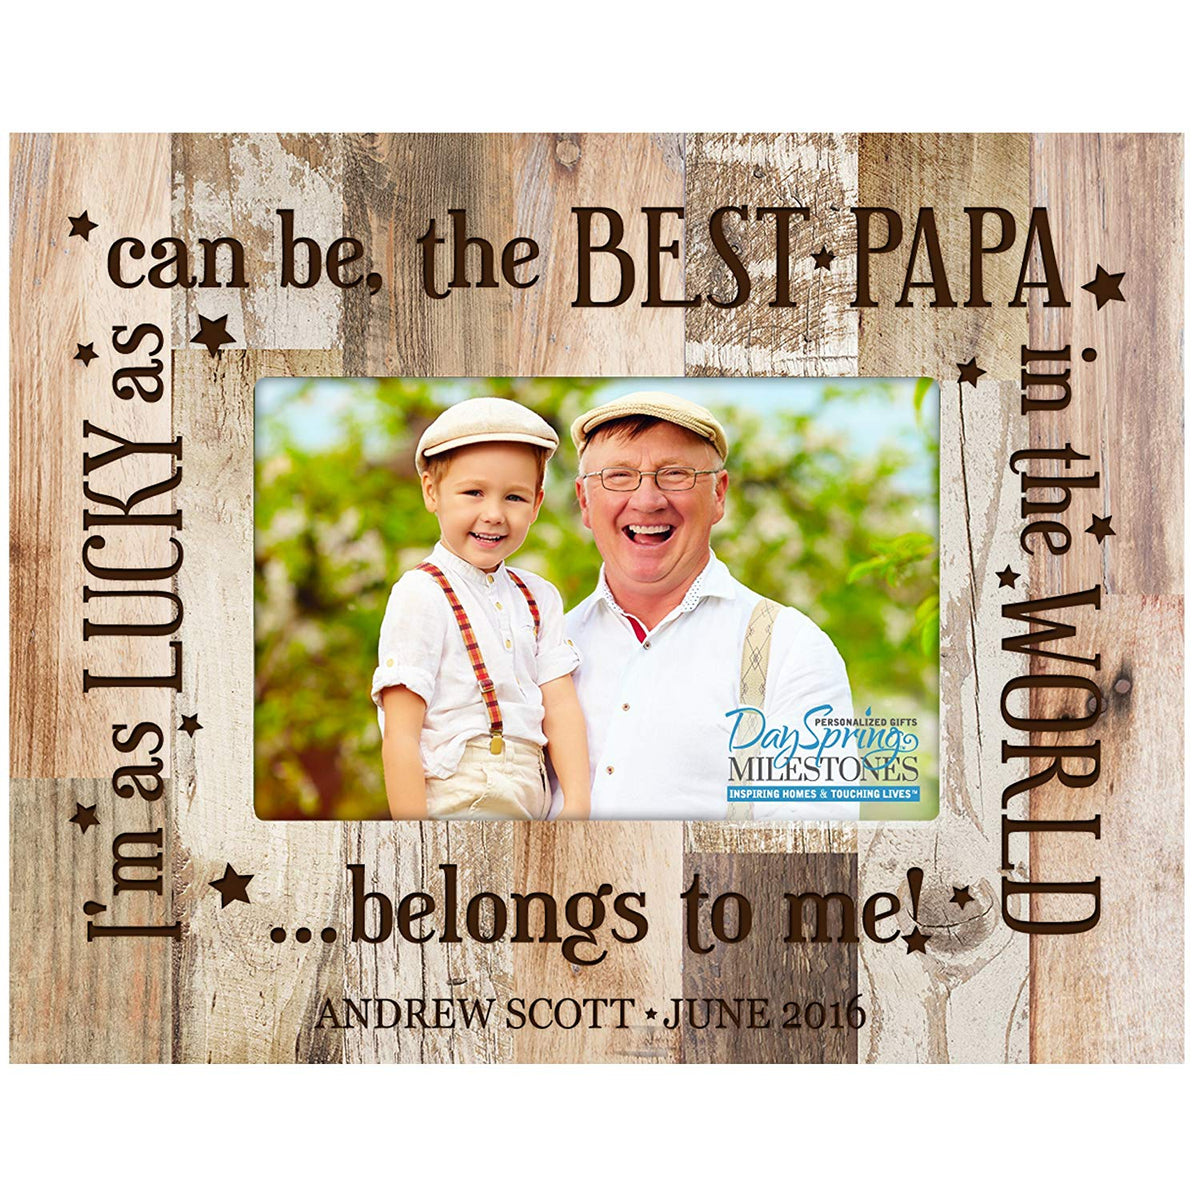 Personalized Father's Day Gift Ideas